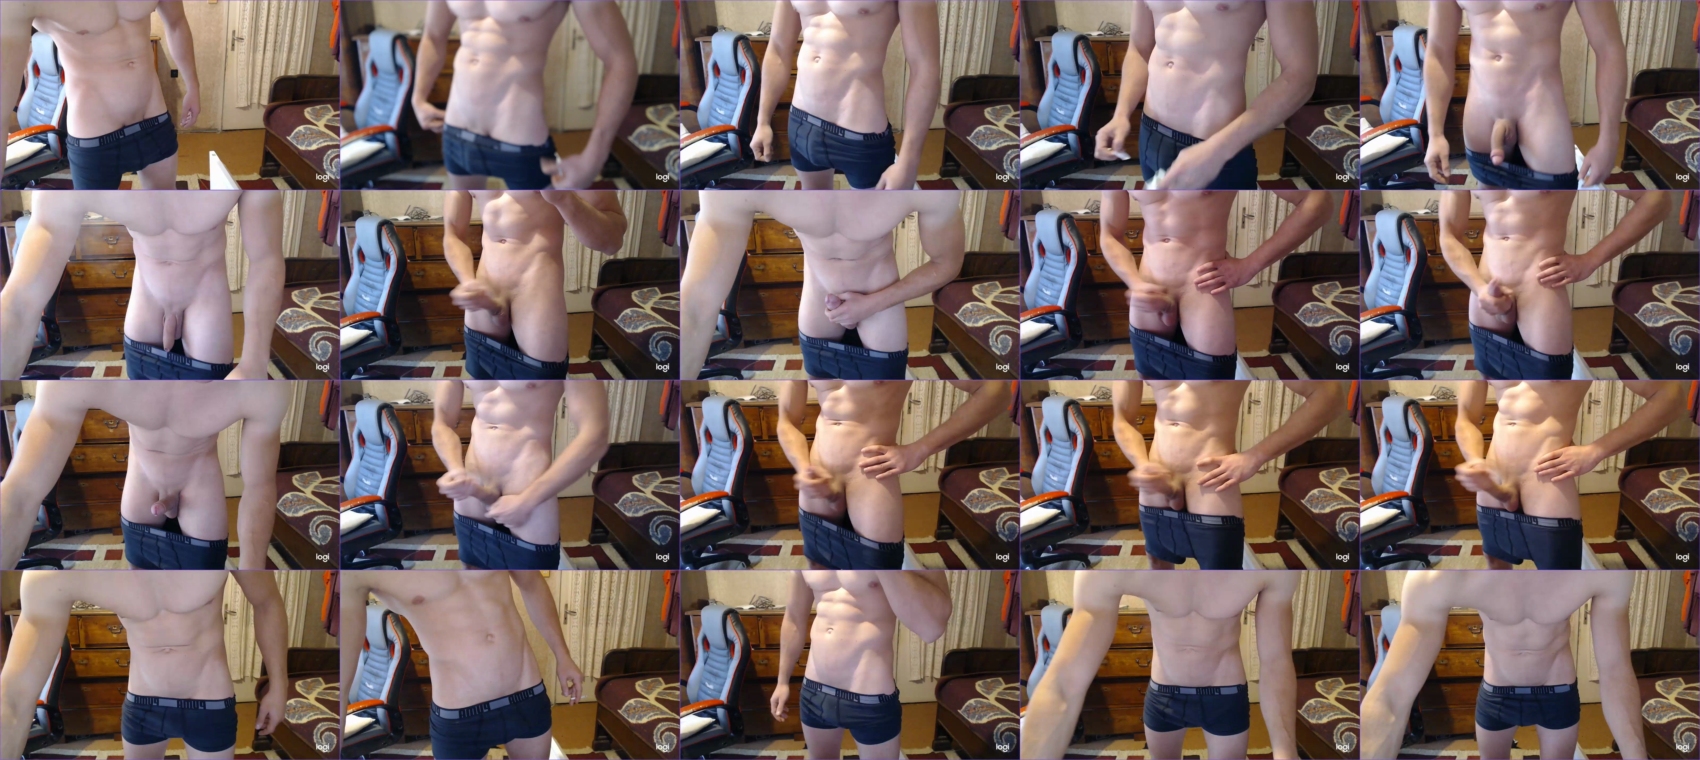 musclesexygod Chaturbate 21-11-2023 Males bigdick